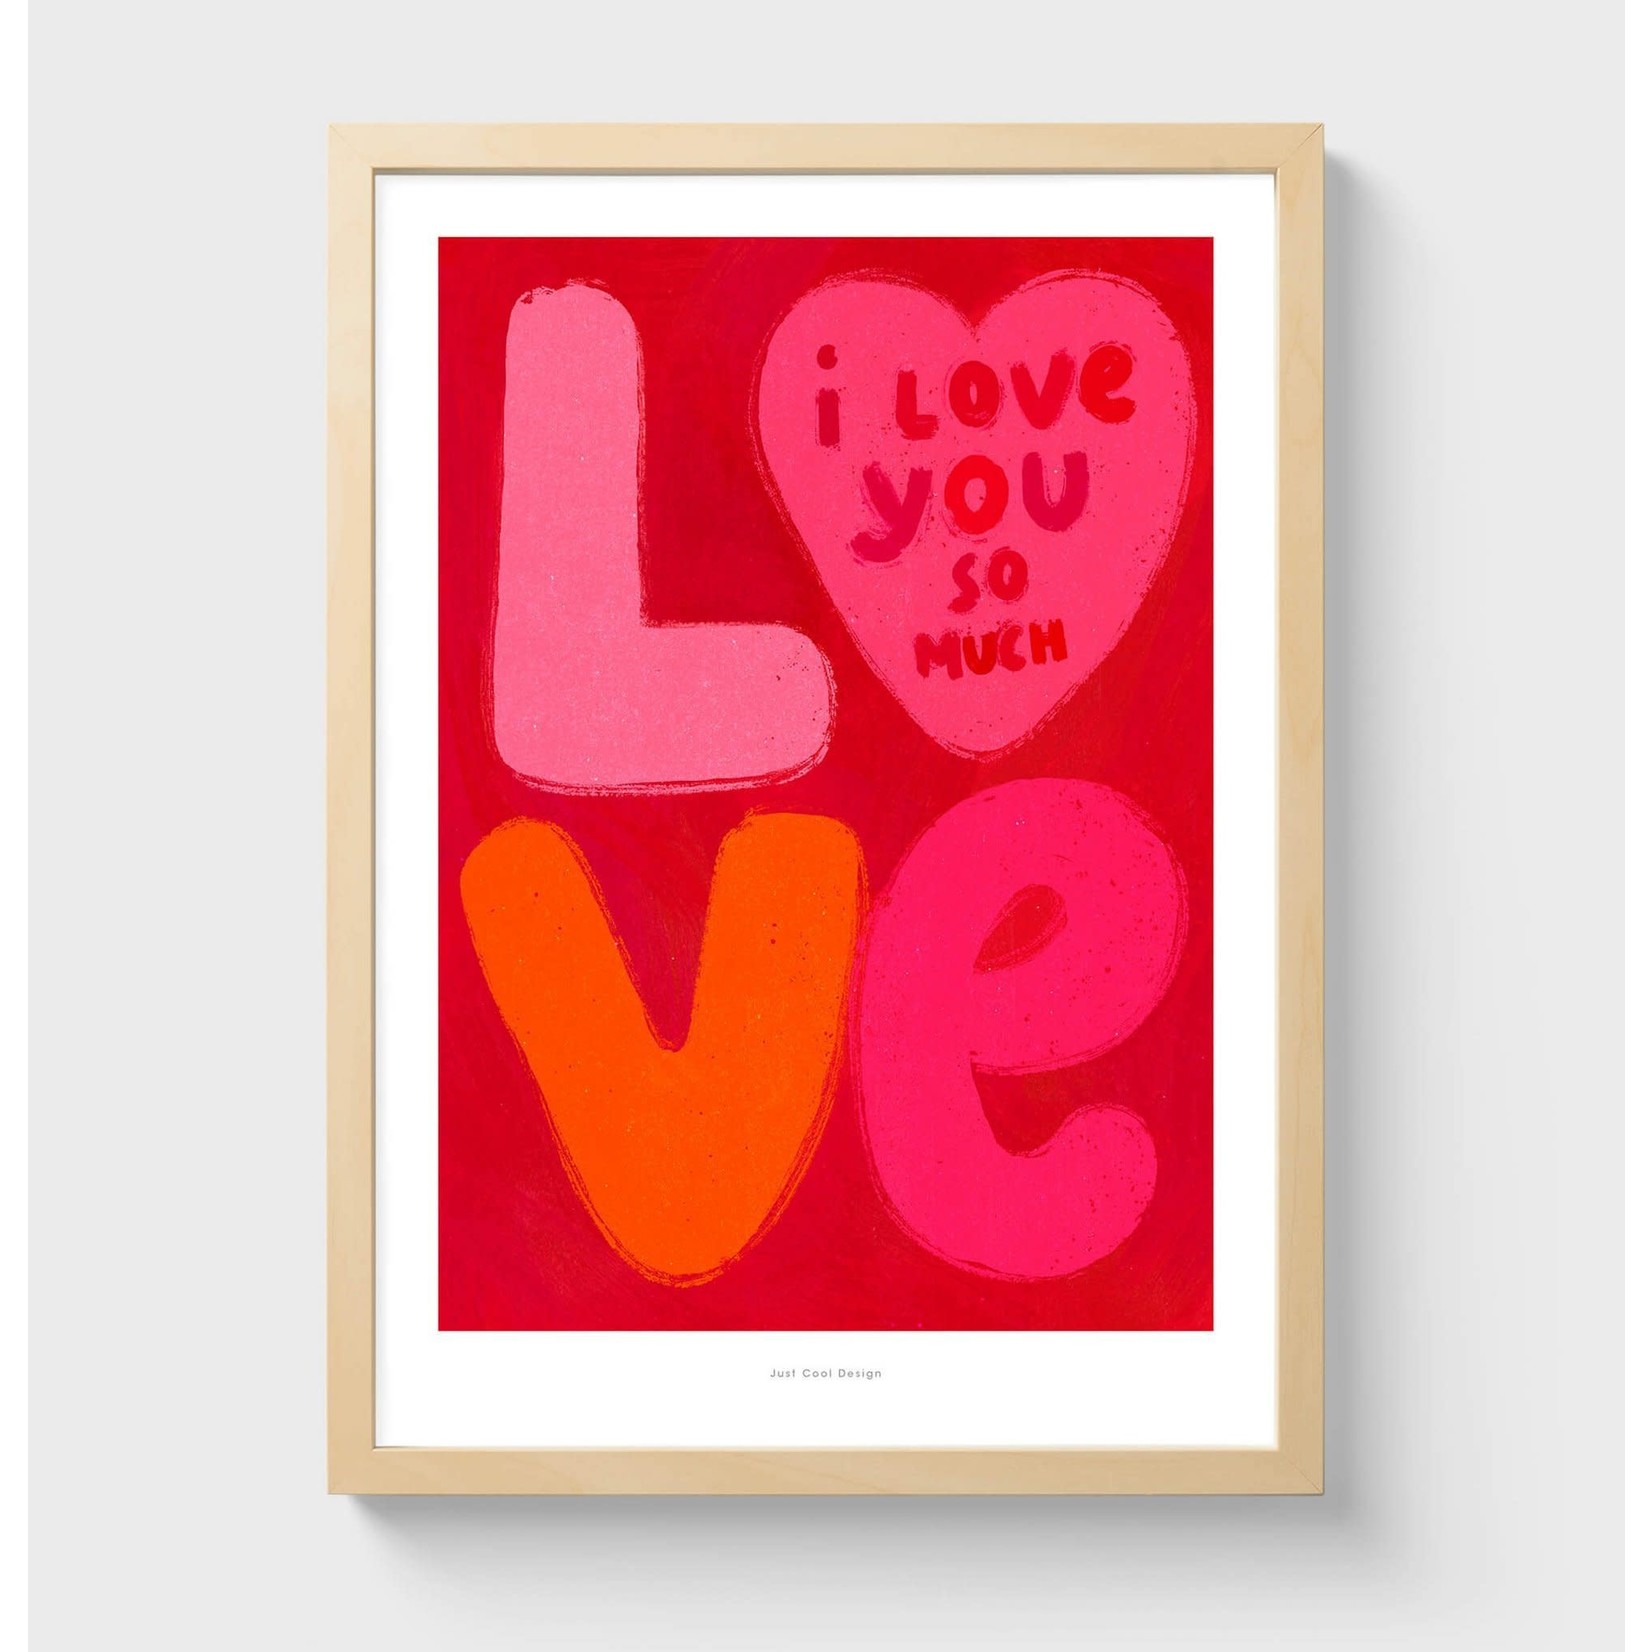 Just Cool Design I love you so much | Illustration art print poster